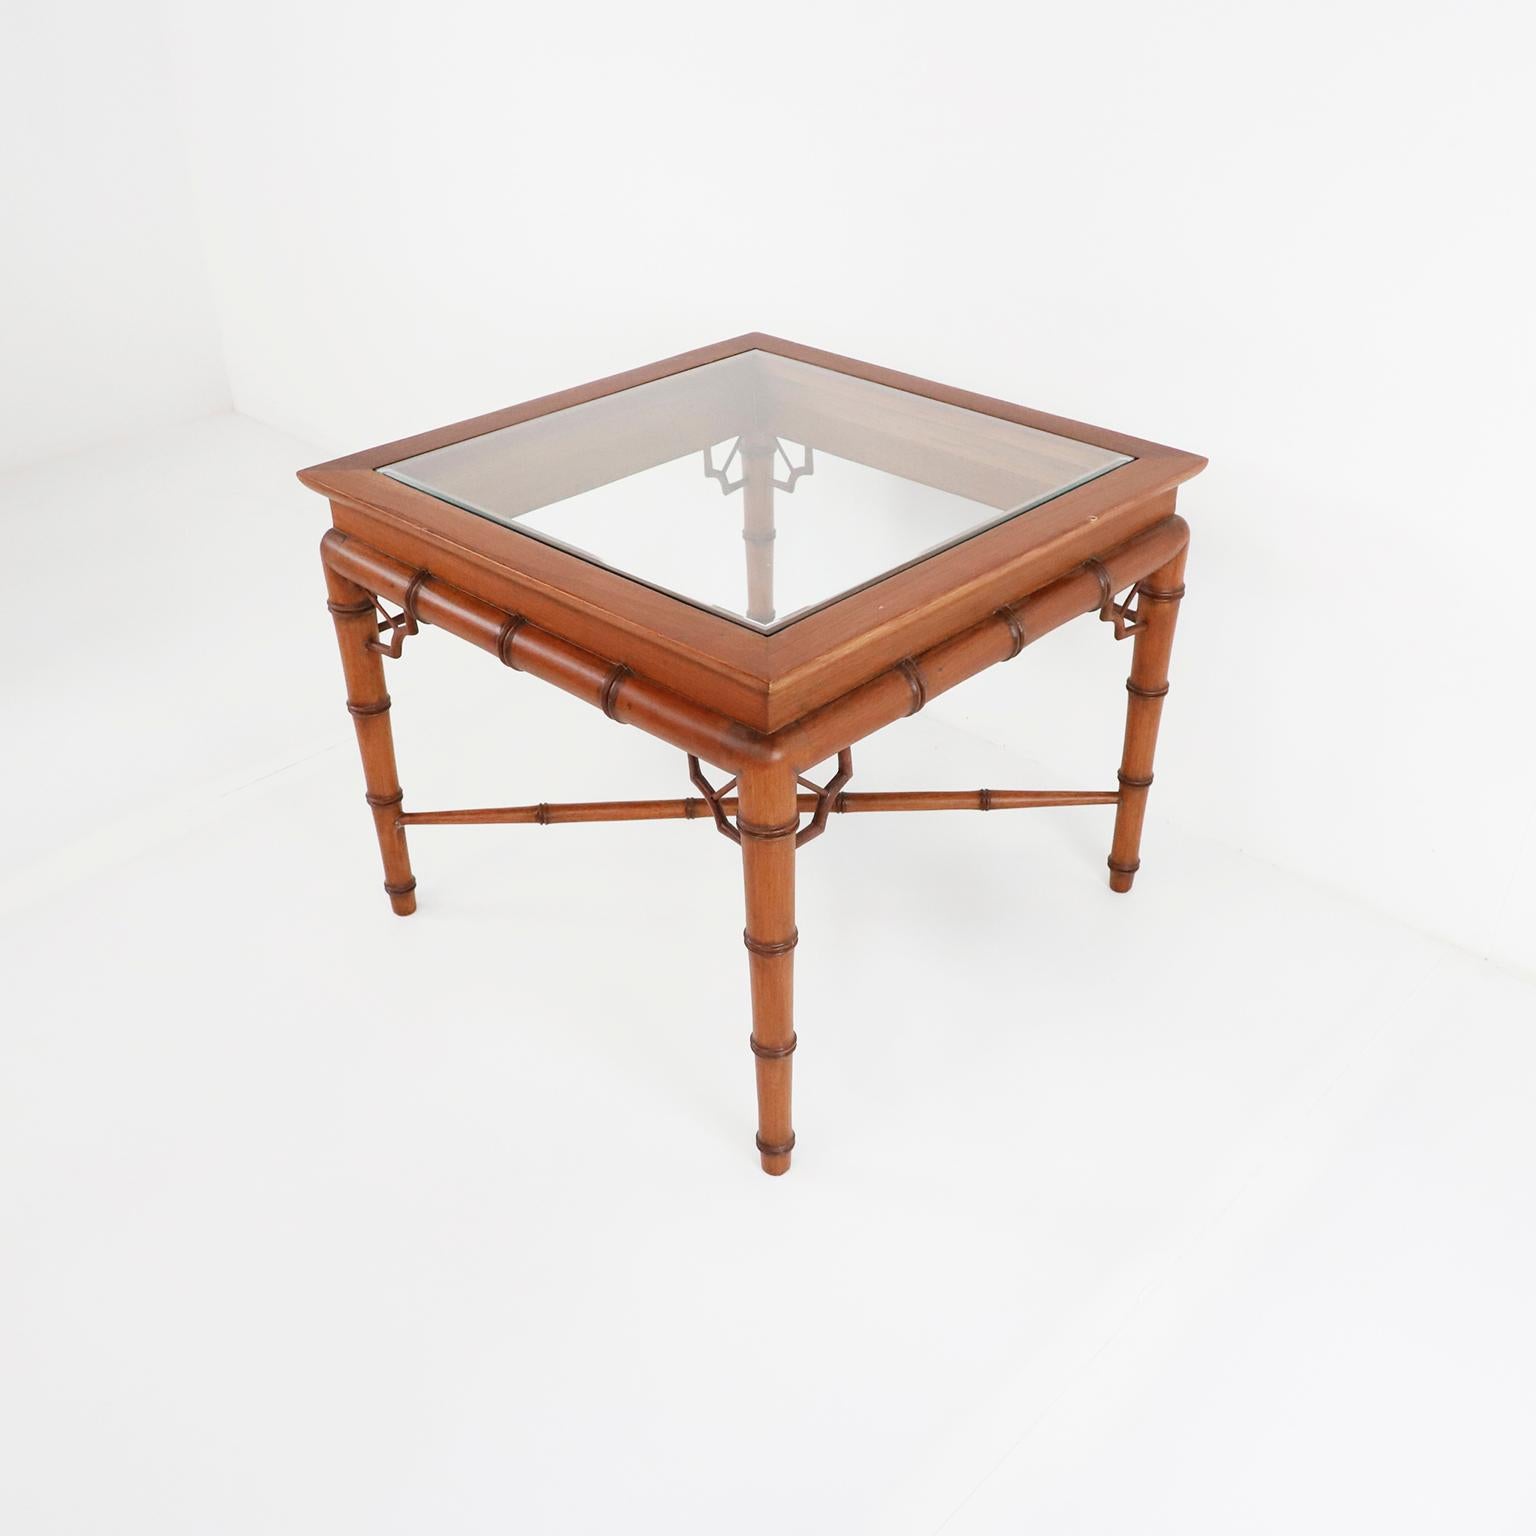 We offer this stunning side table attributed to Frank Kyle, circa 1960. Made in solid Mahogany.